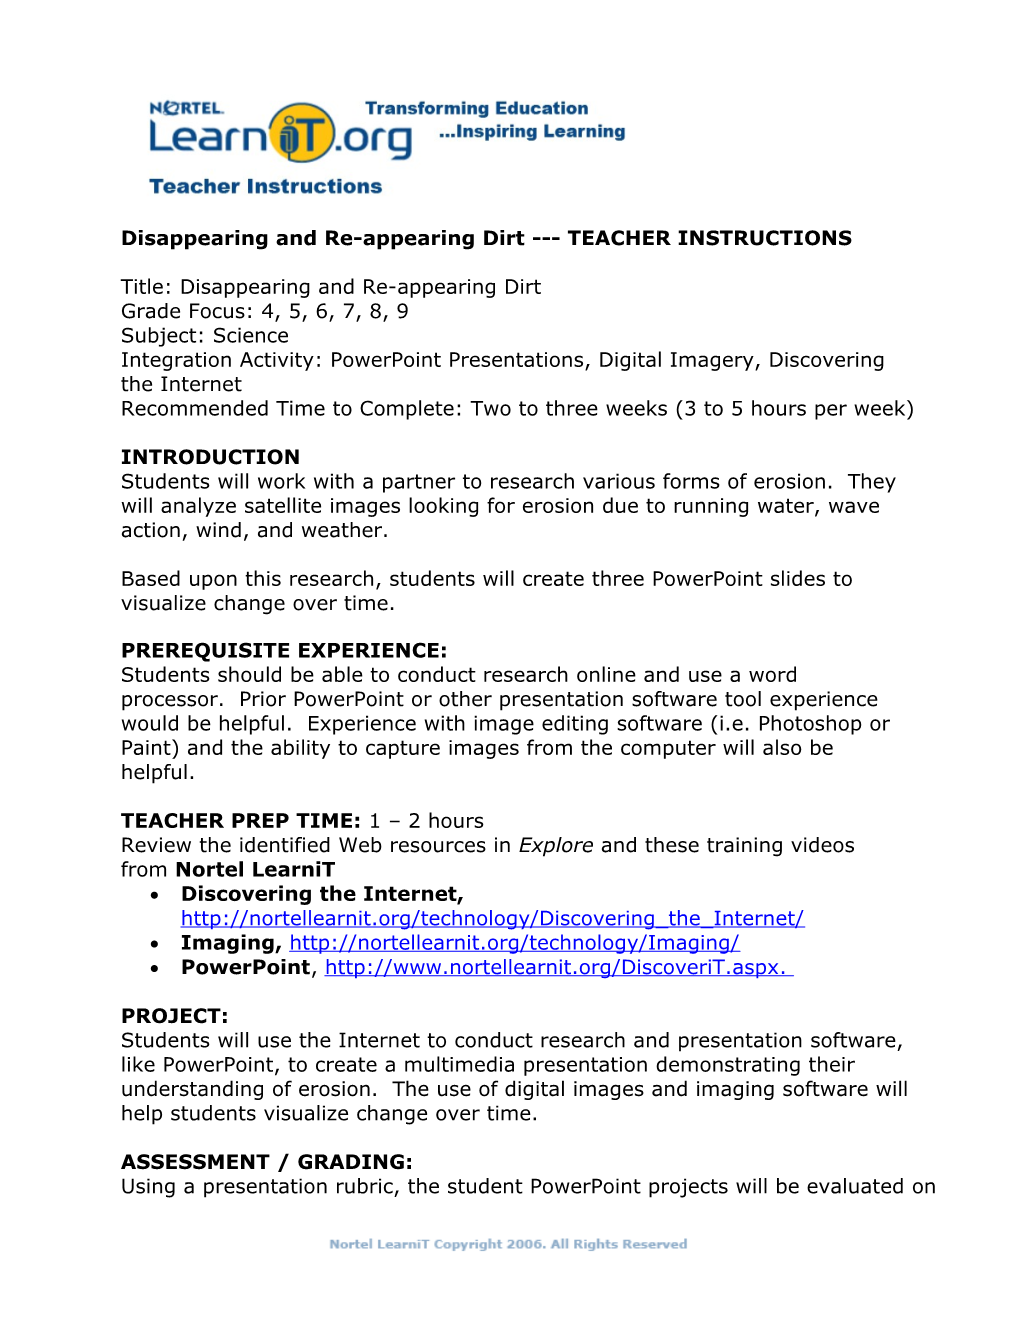 Disappearing and Re-Appearing Dirt TEACHER INSTRUCTIONS